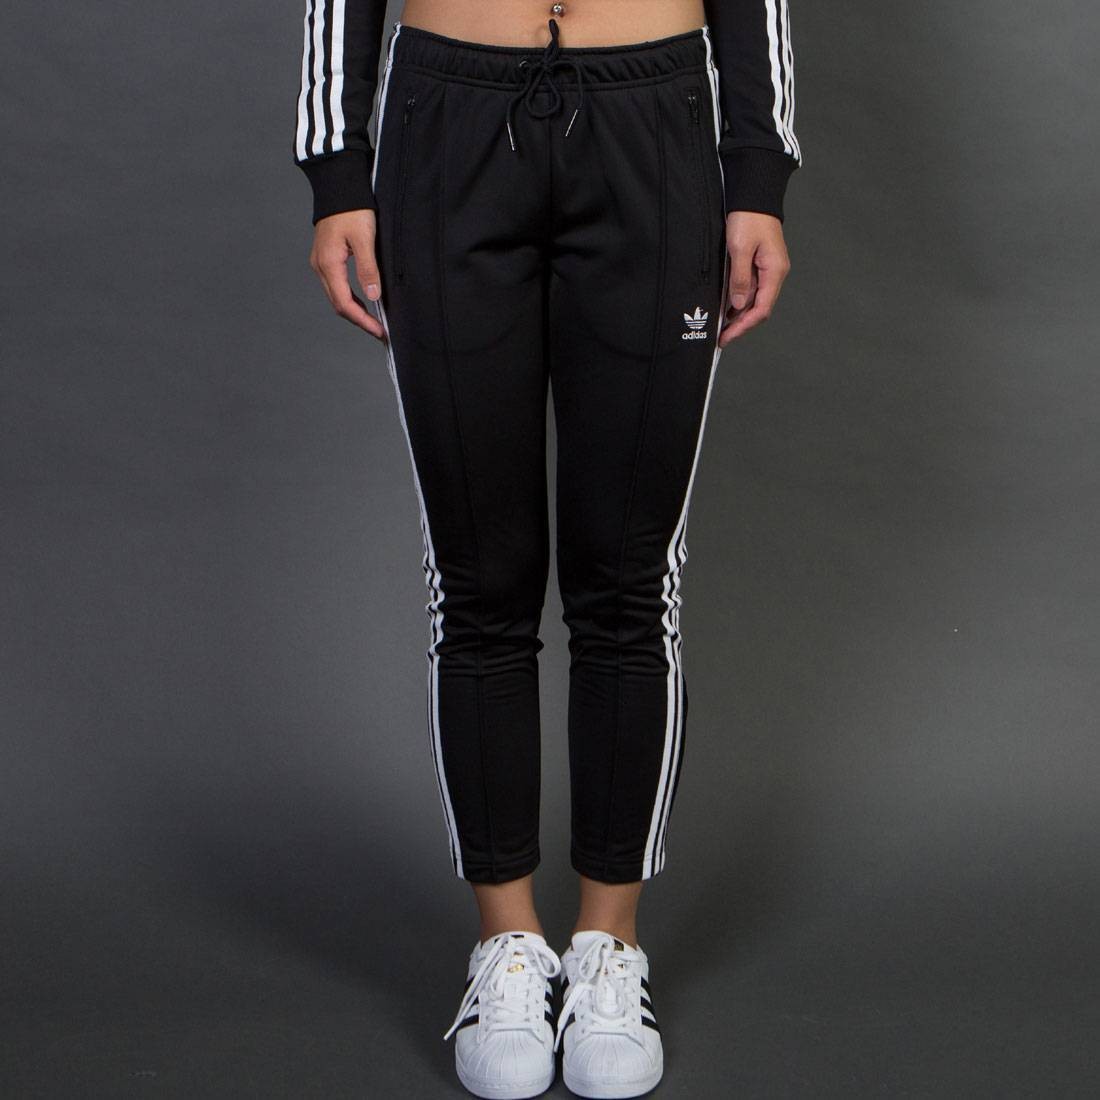 Adidas Originals Cigarette Pant Womens Fashion Bottoms Other Bottoms on  Carousell